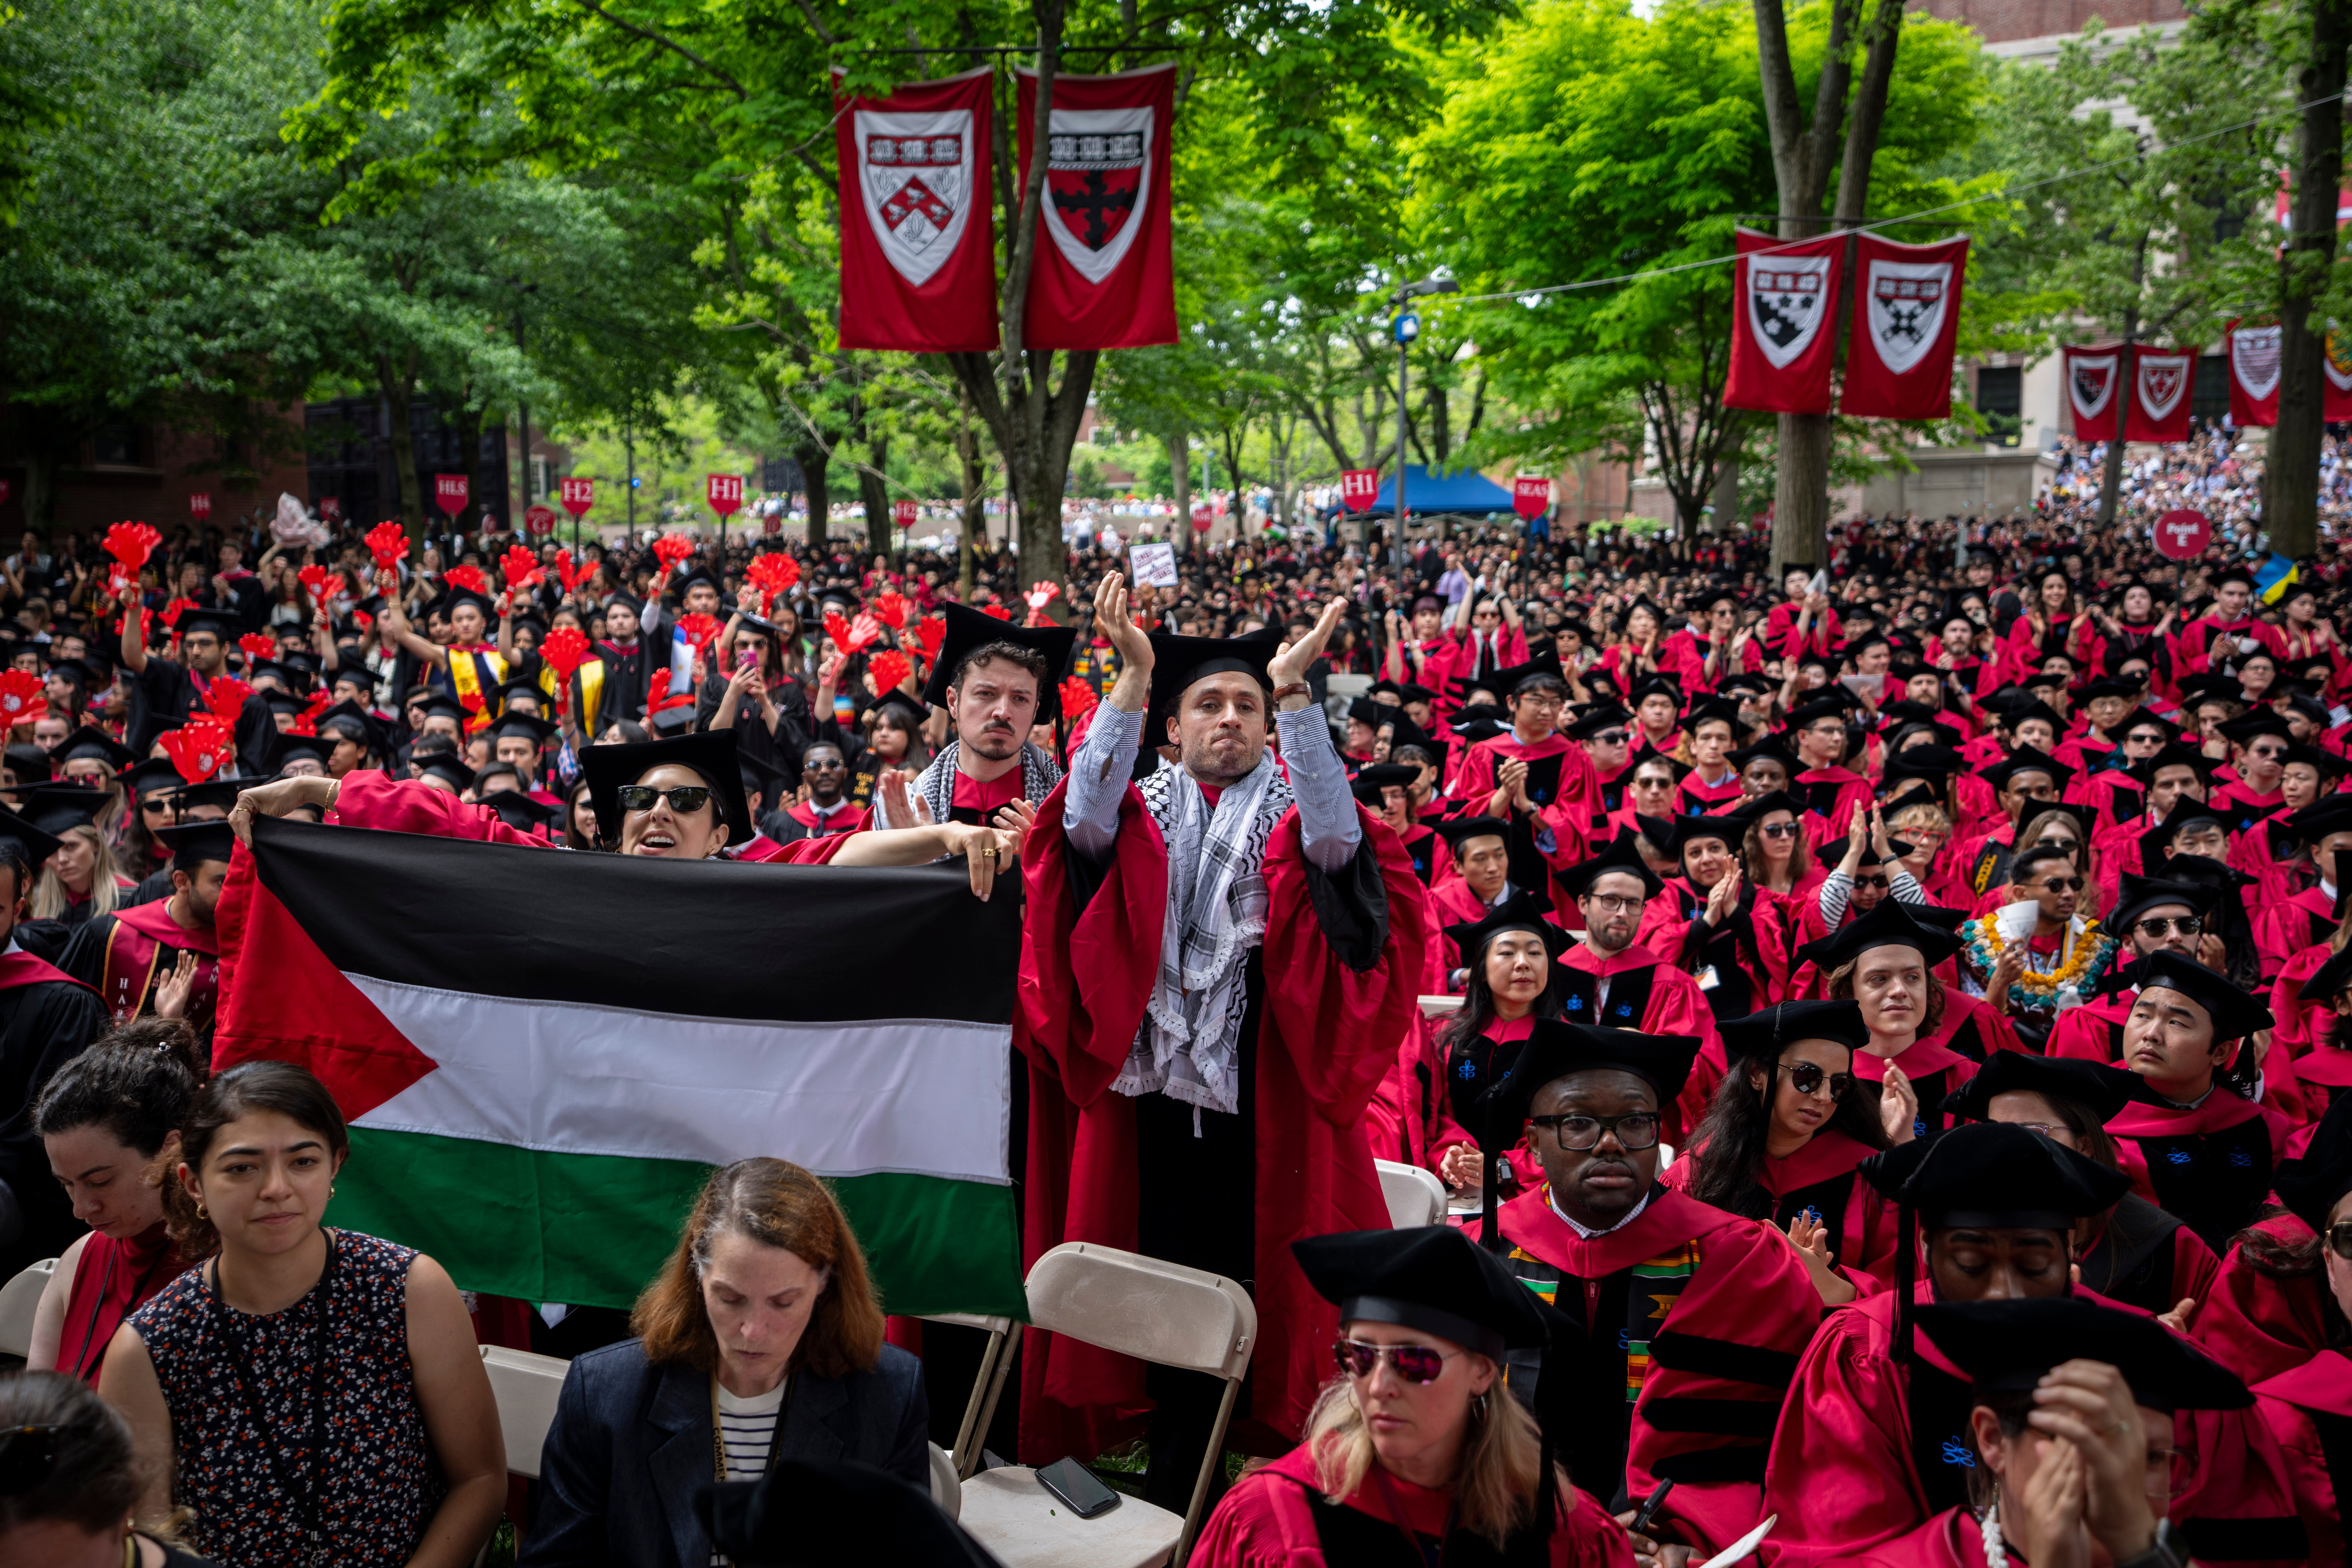 Students graduating hold up a Palestinian flag duirng the graduation ceremony in Harvard Yard, at Harvard University on Thursday